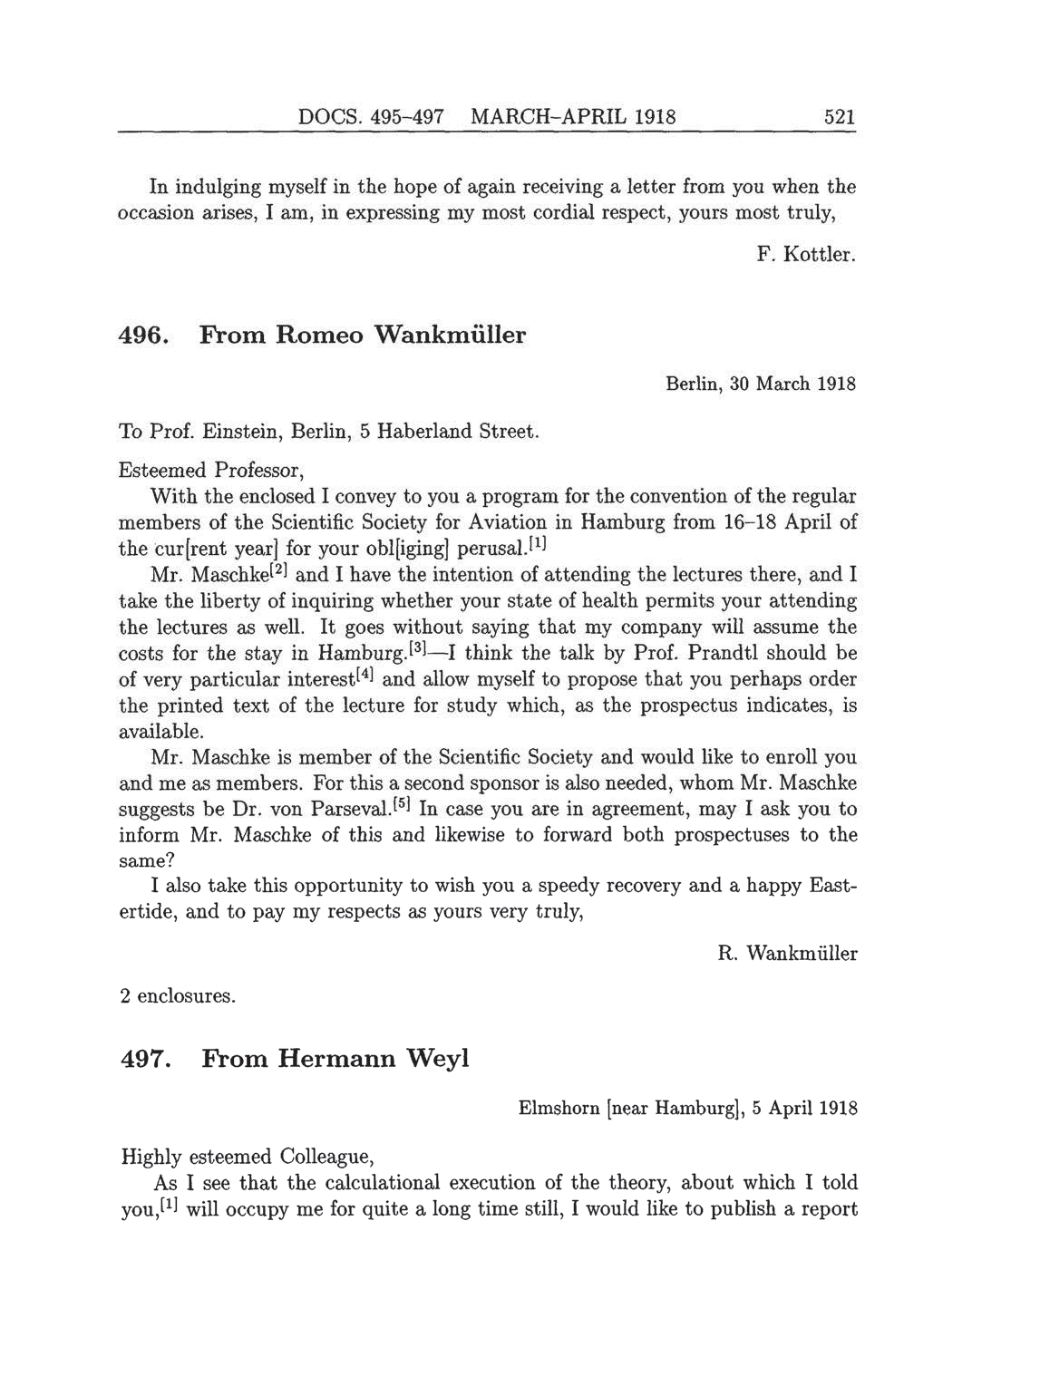 Volume 8: The Berlin Years: Correspondence, 1914-1918 (English translation supplement) page 521